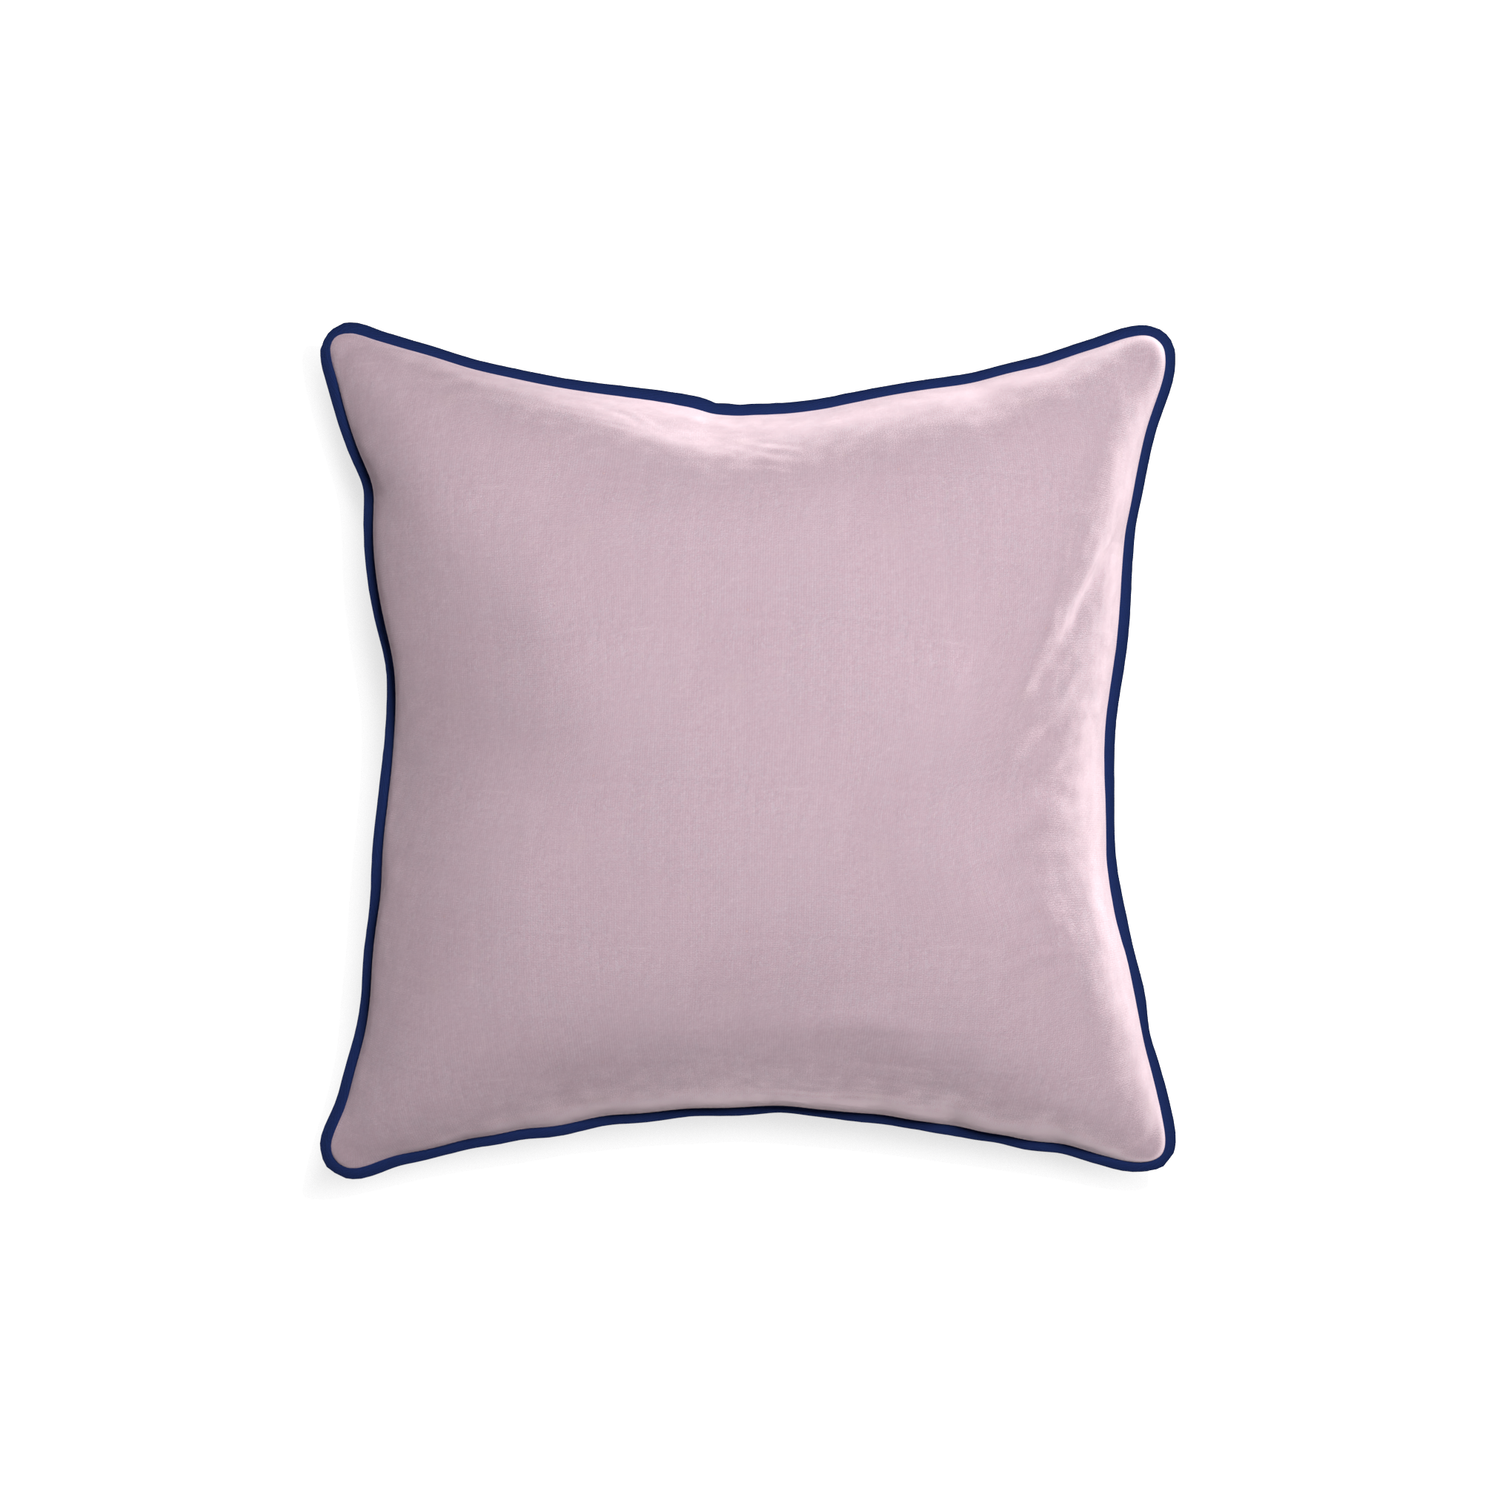 square lilac velvet pillow with navy blue piping